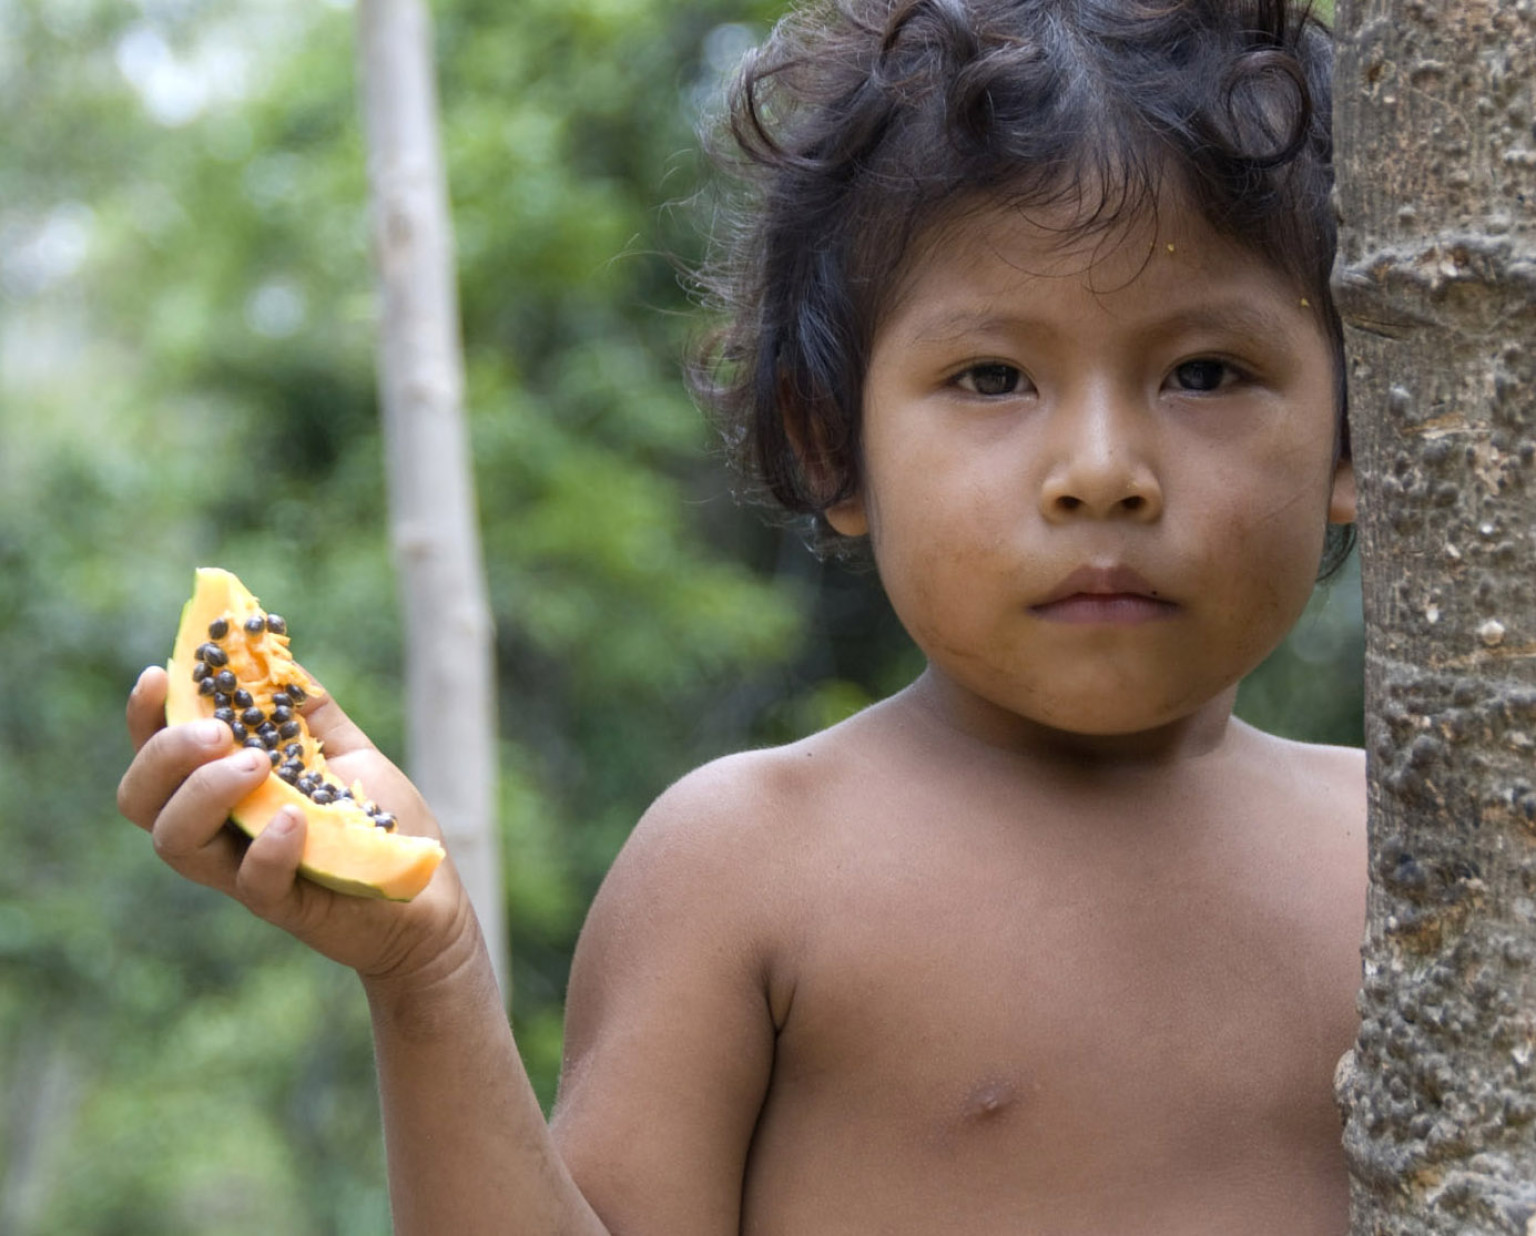 Brazils Army Moves To Protect Indigenous Aw Tribe By Halting Illegal Logging -5744